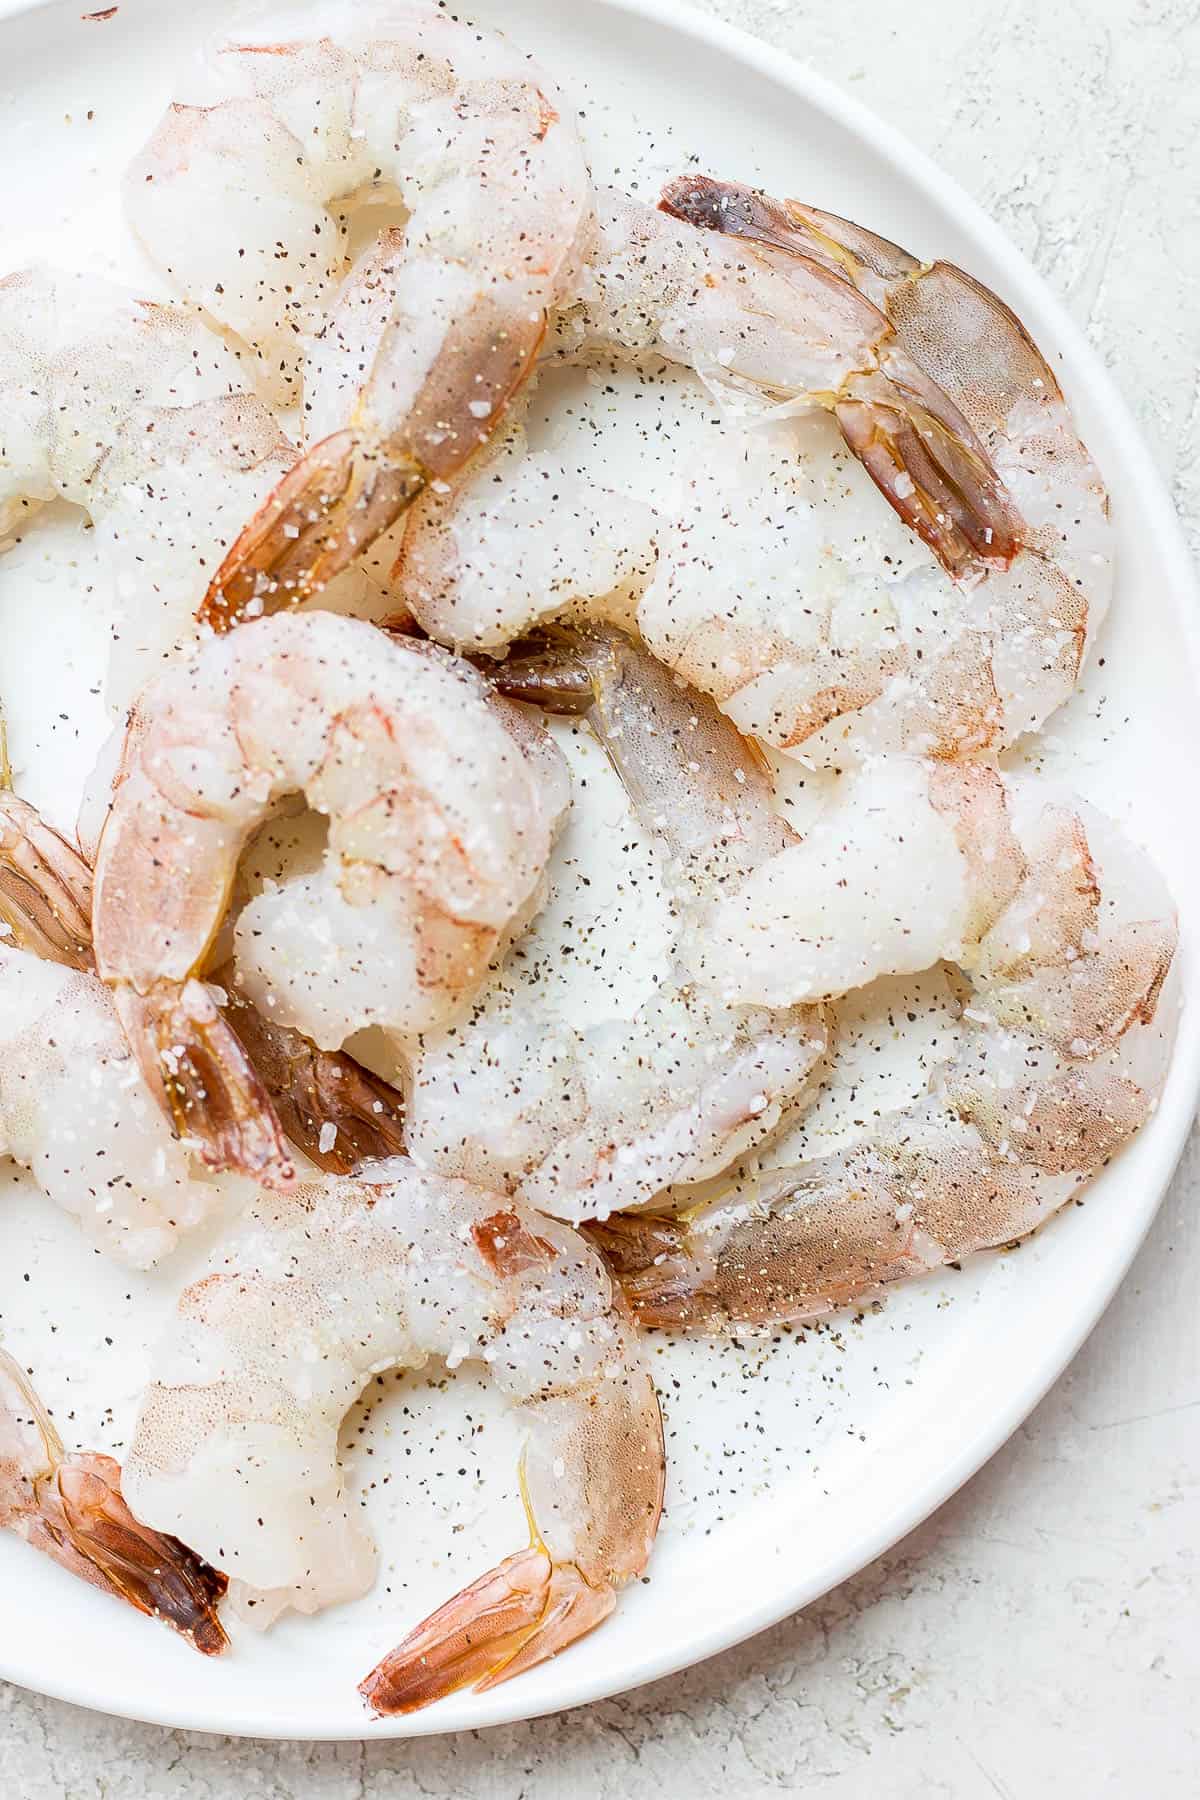 Shrimp on a plate seasoned with salt and pepper.